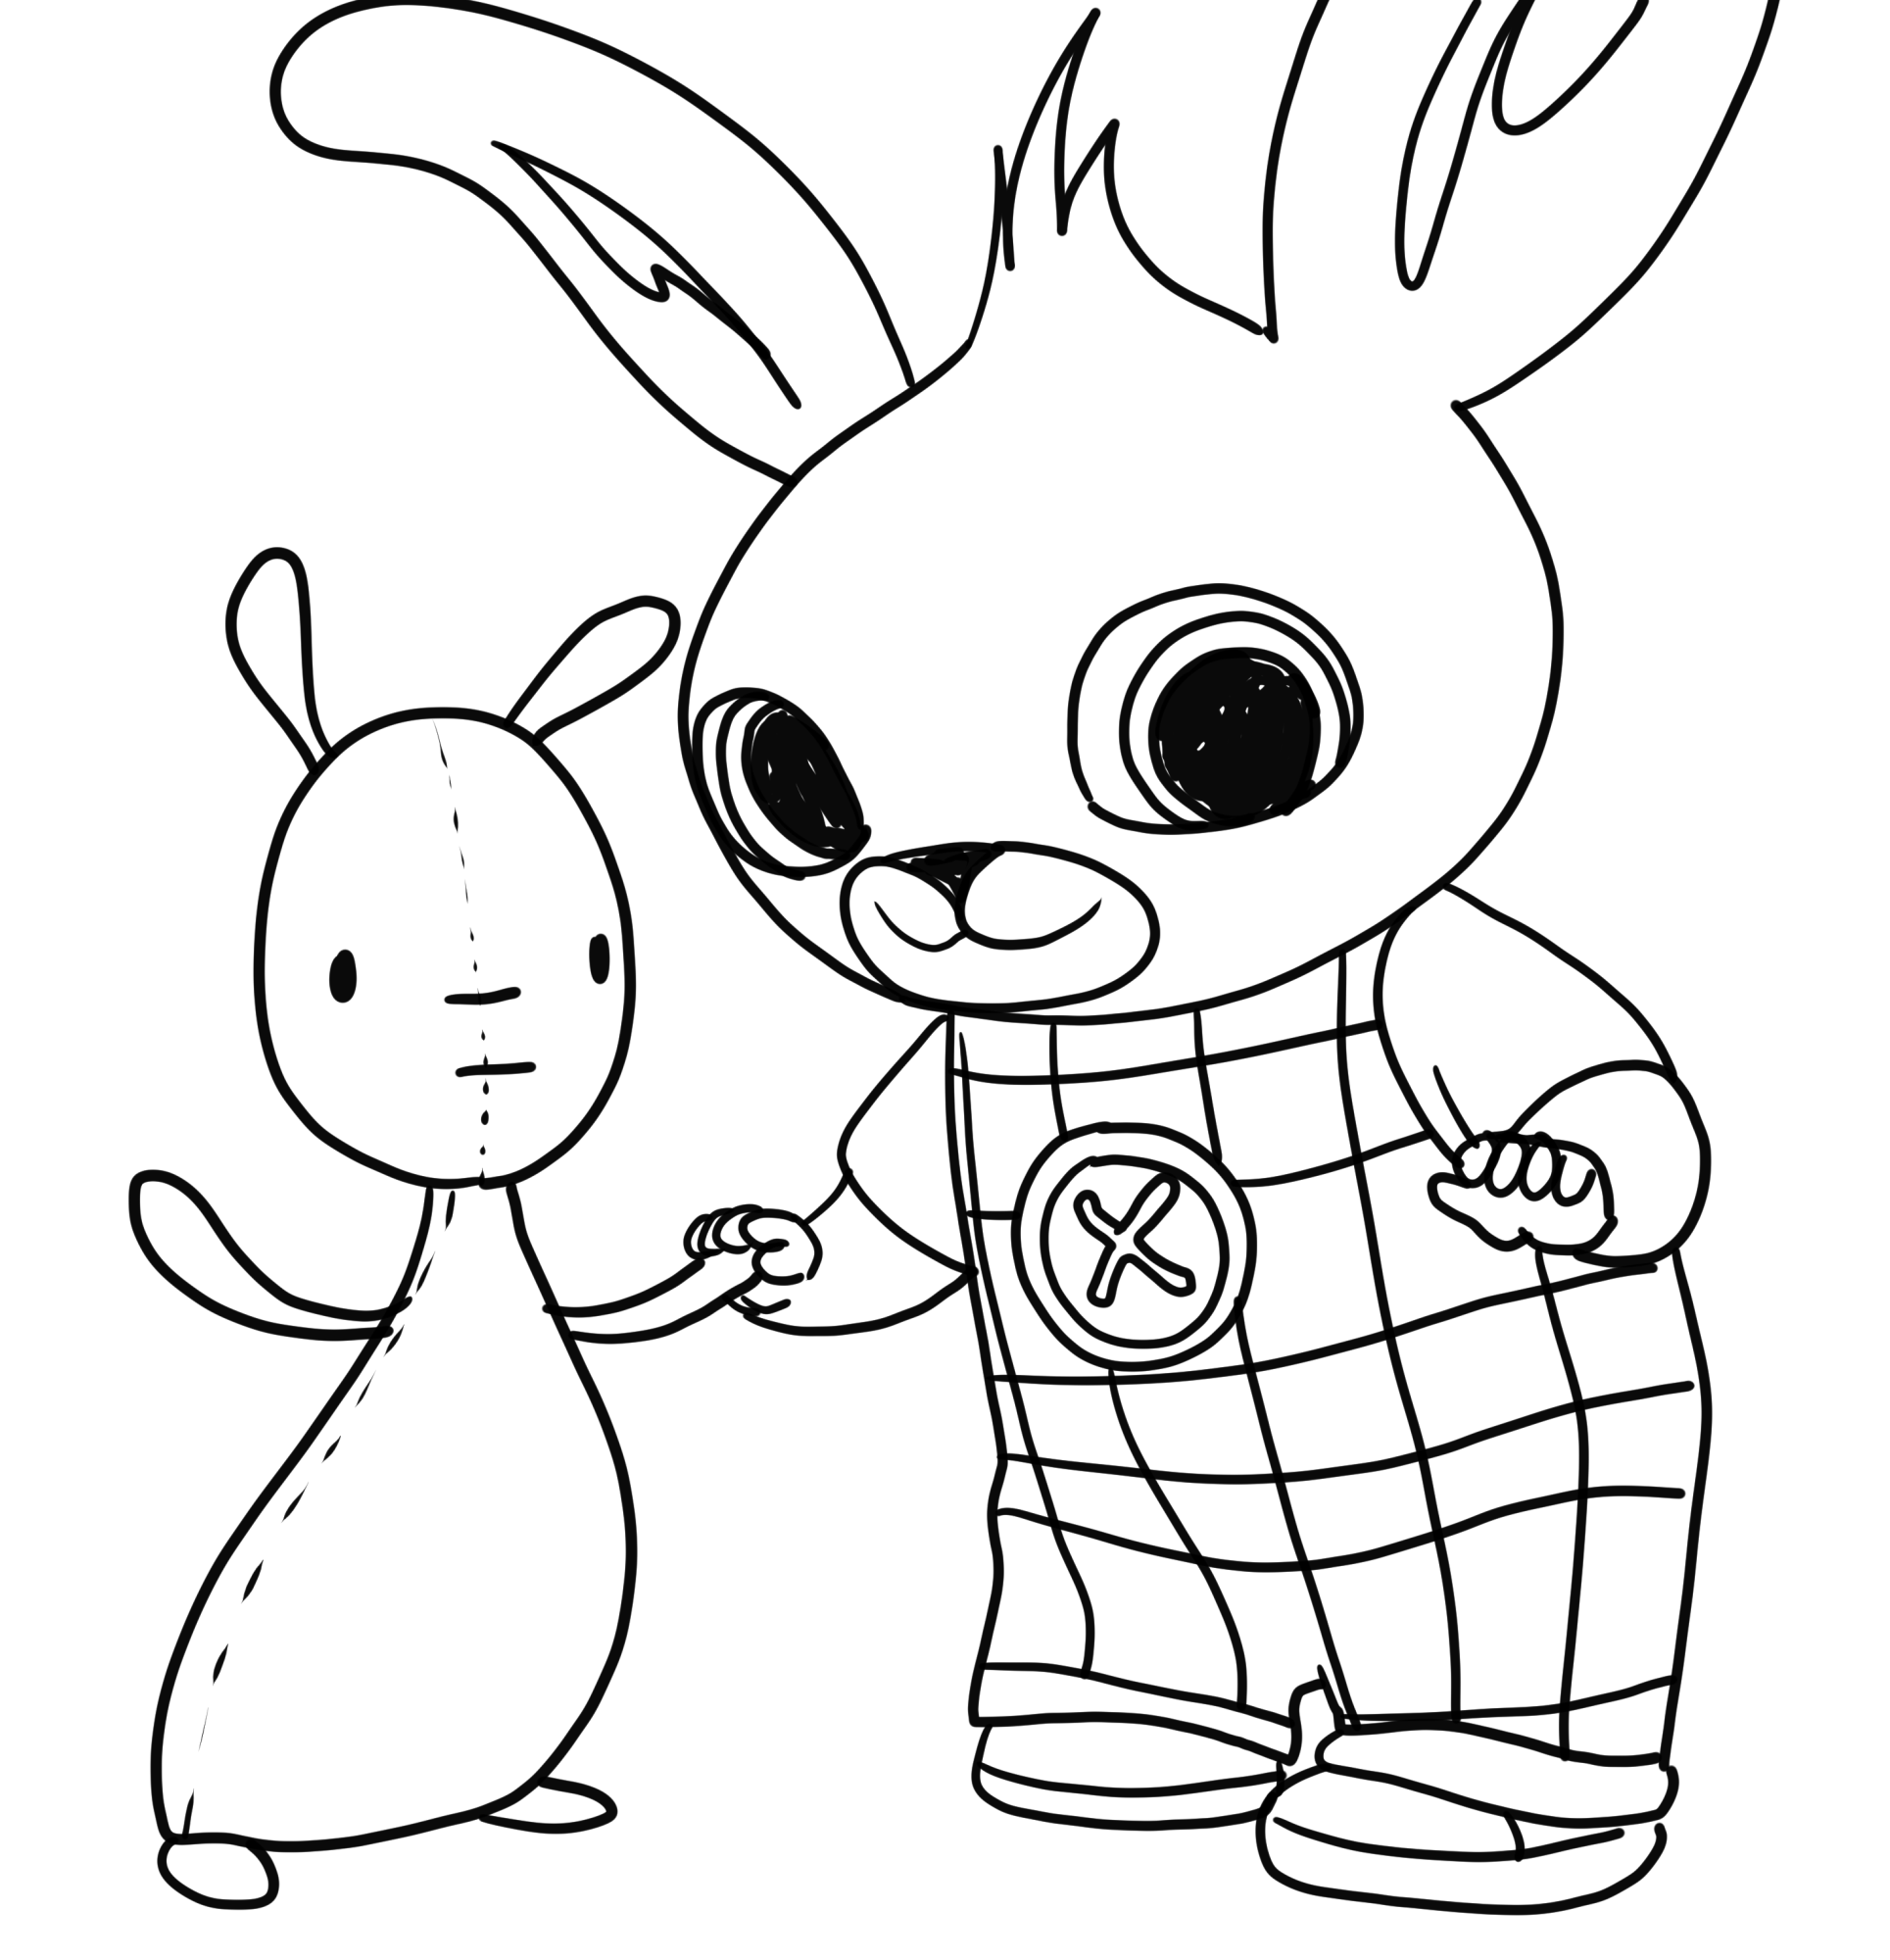 Bing Printable Coloring Pages